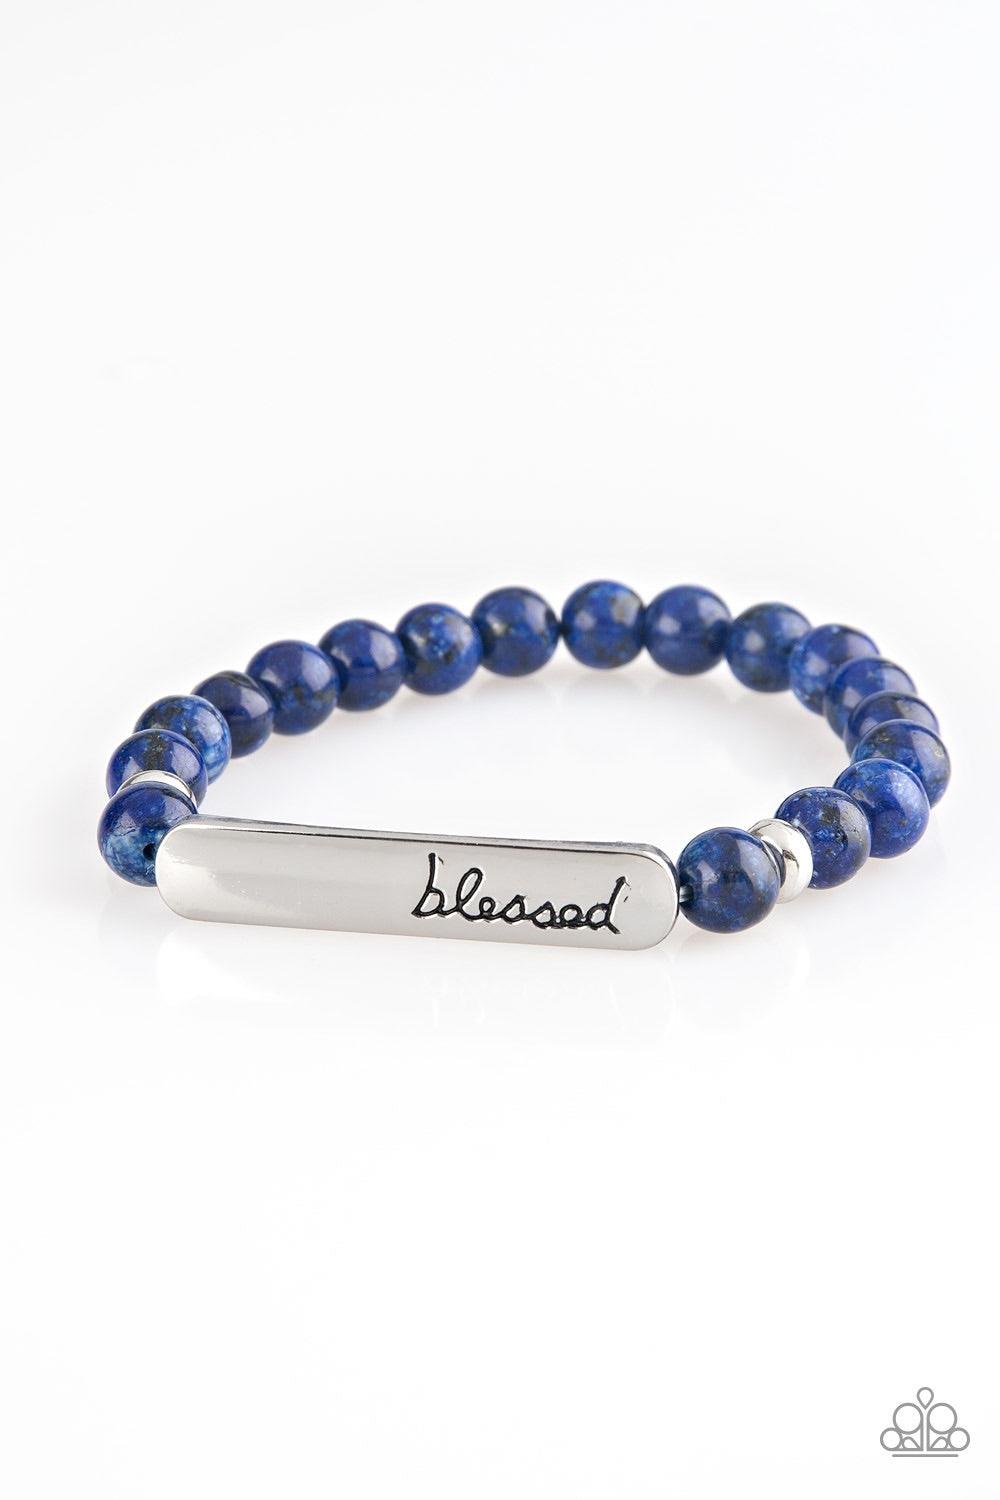 Paparazzi Accessories Born Blessed - Blue Infused with dainty silver accents, a collection of speckled blue stones are threaded along a stretchy band. A glistening silver frame engraved with the word, "blessed" adorns the center for a seasonal finish. Jew